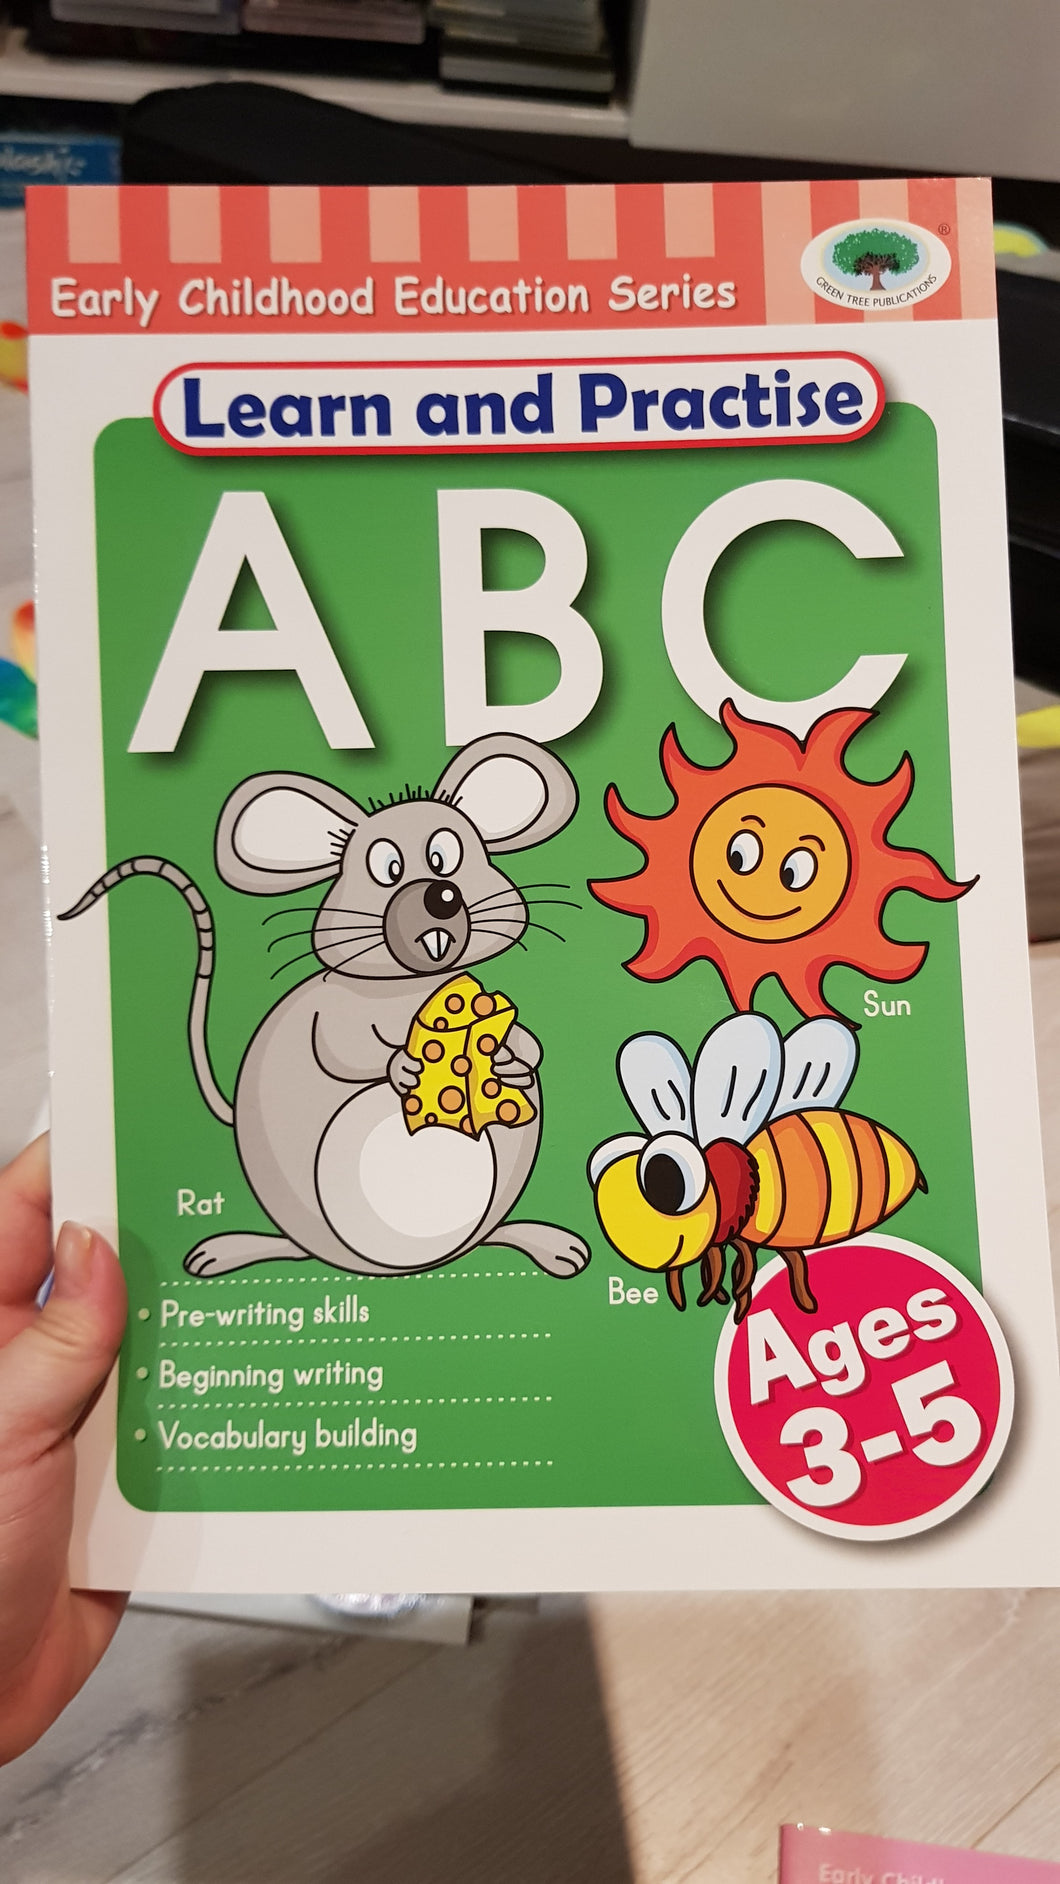 LEARN & PRACTISE ABC AGE 3-5